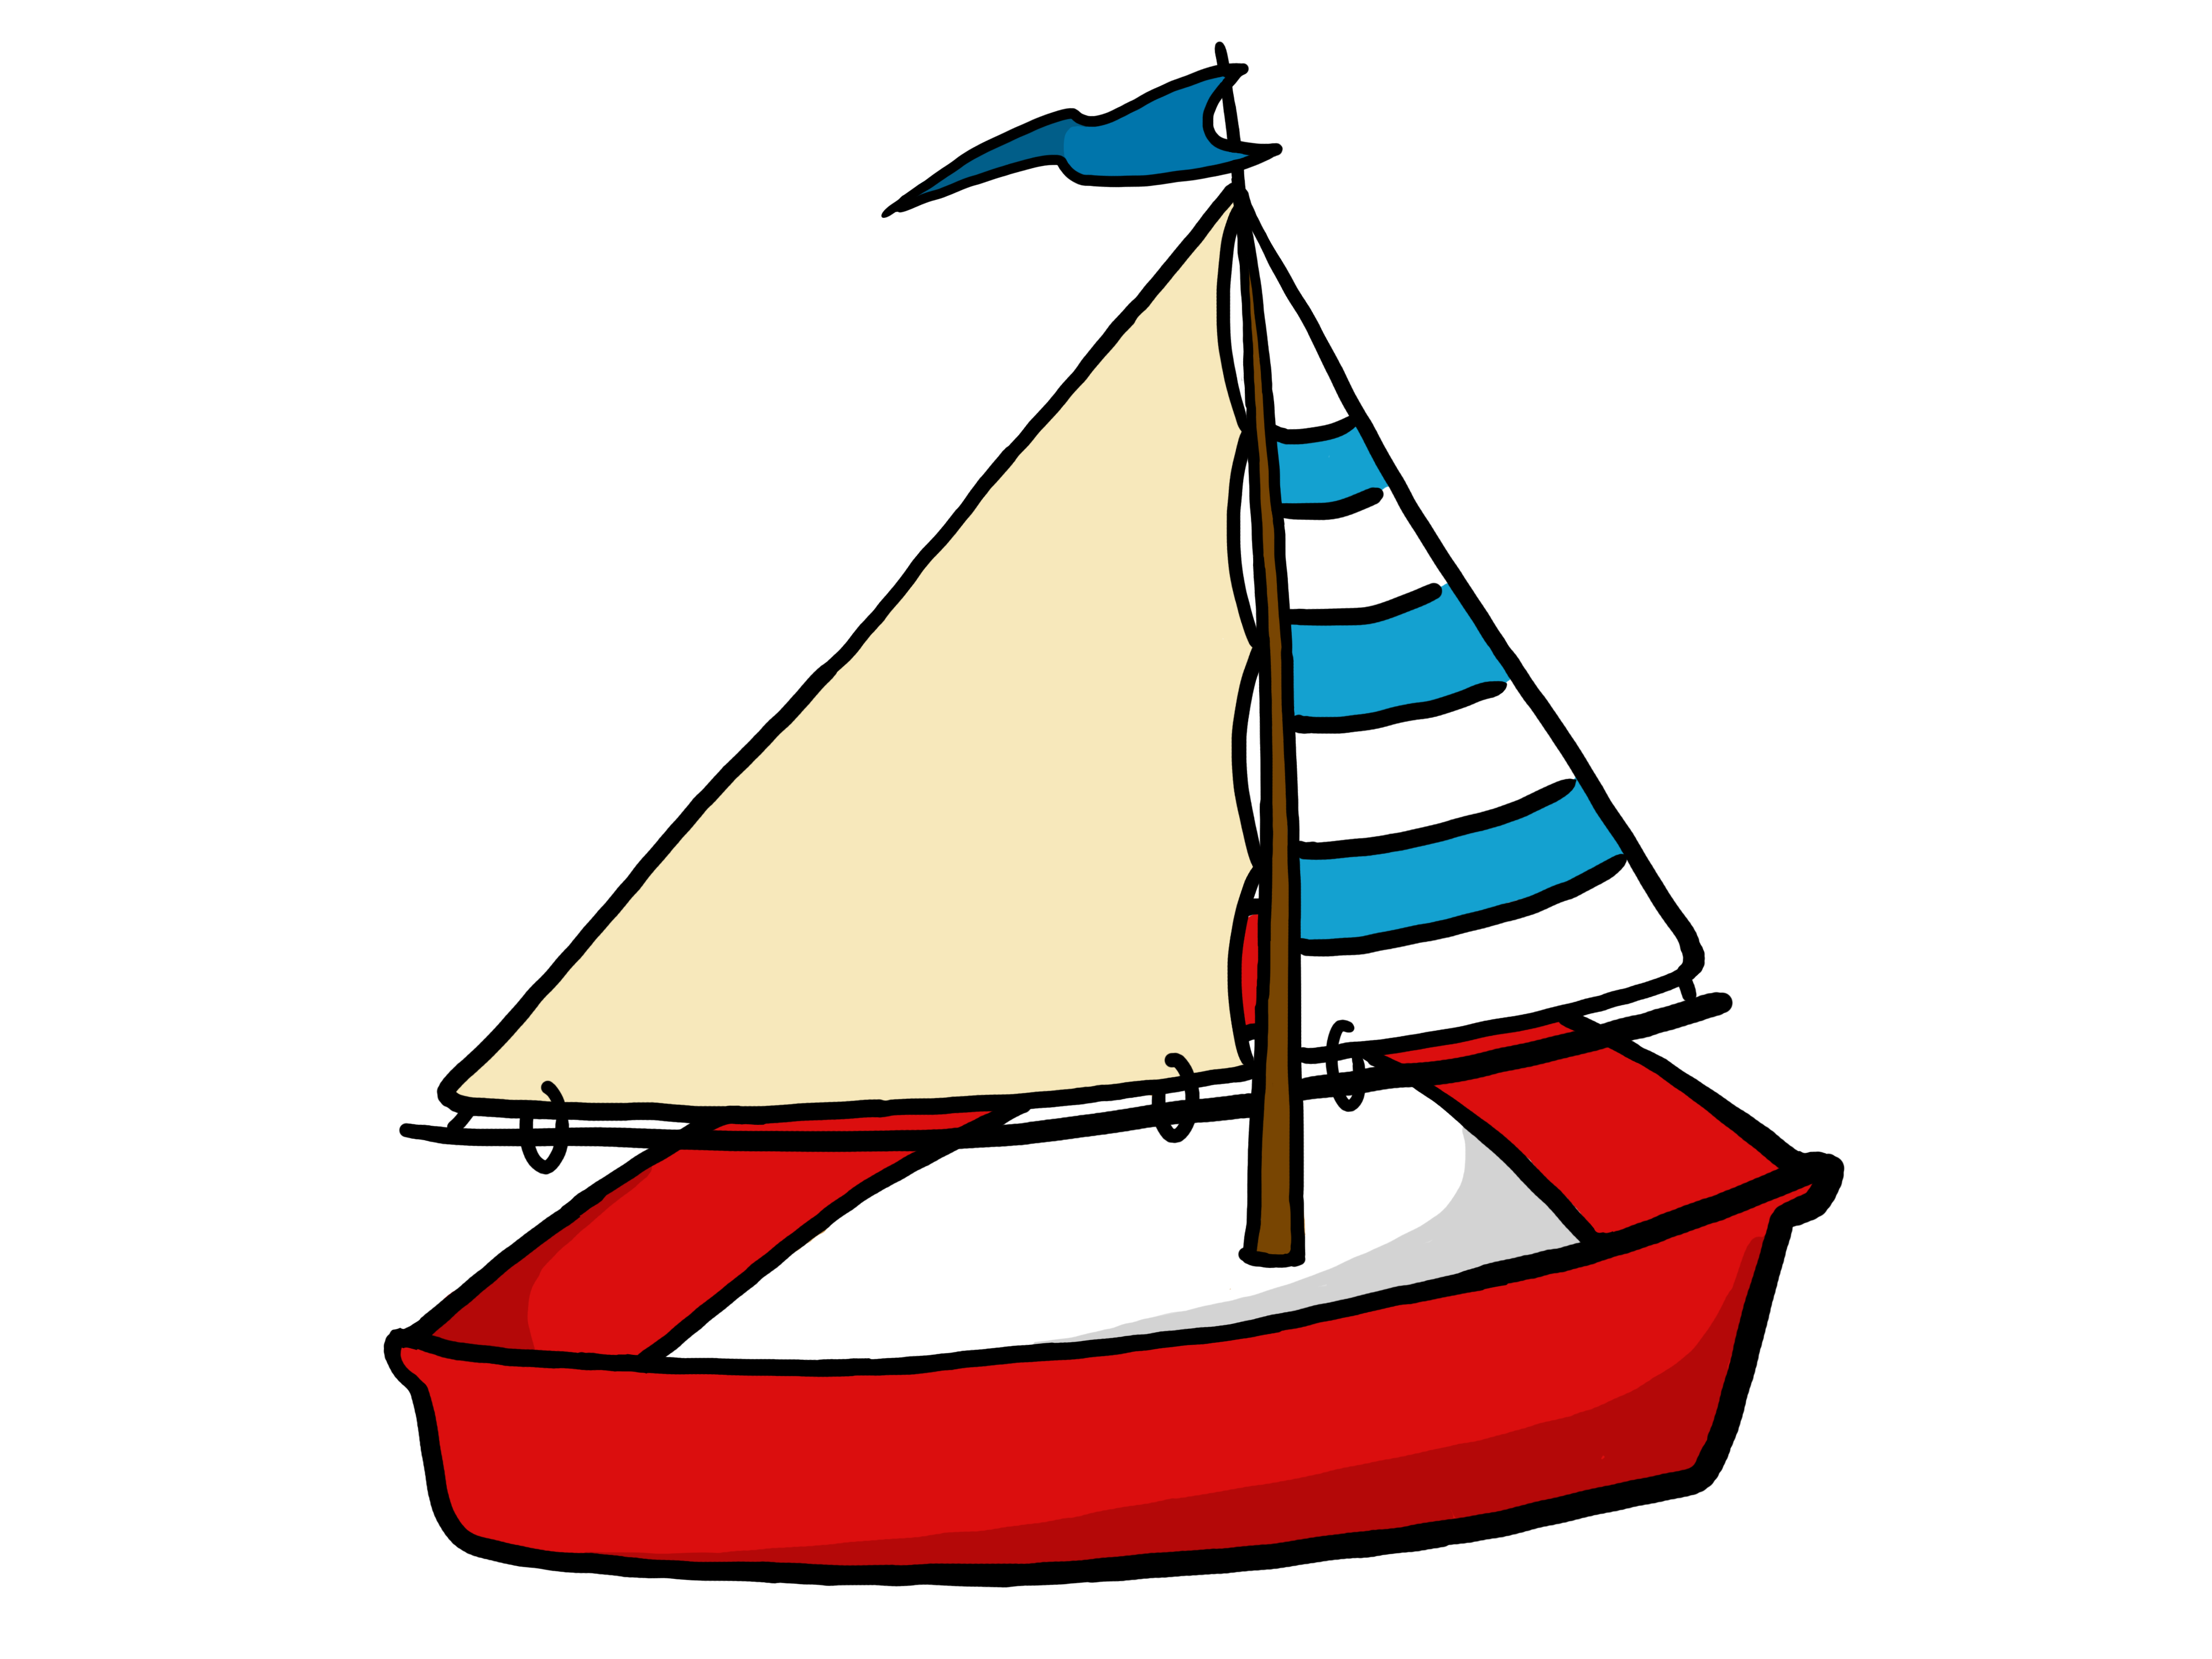 Boating Clipart   Clipart Panda   Free Clipart Images